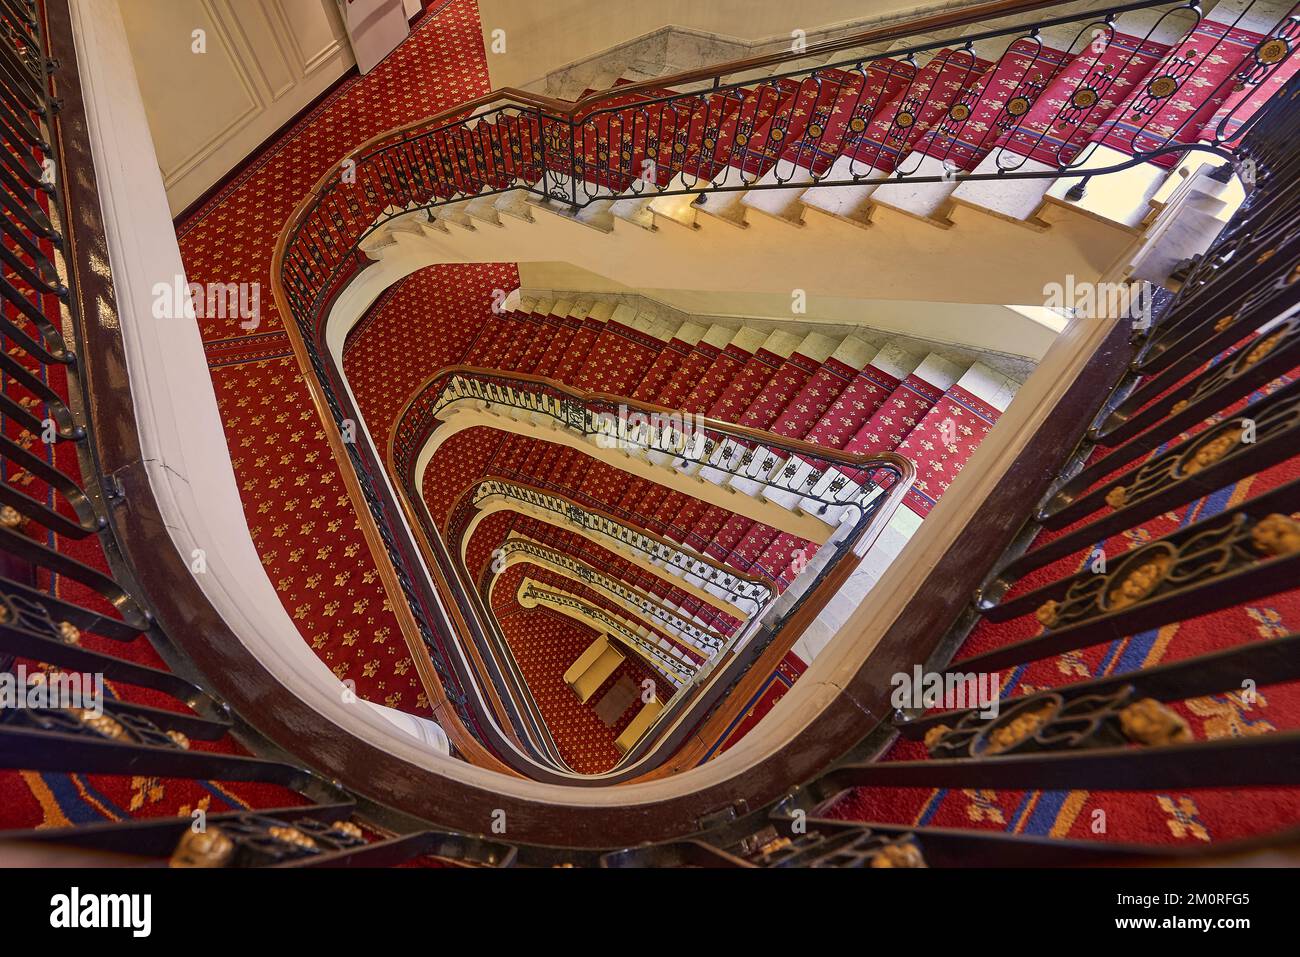 Luxury stairs view from above, Bilbao, Biscay, Basque Country, Euskadi, Euskal Herria, Spain, Europe. Stock Photo